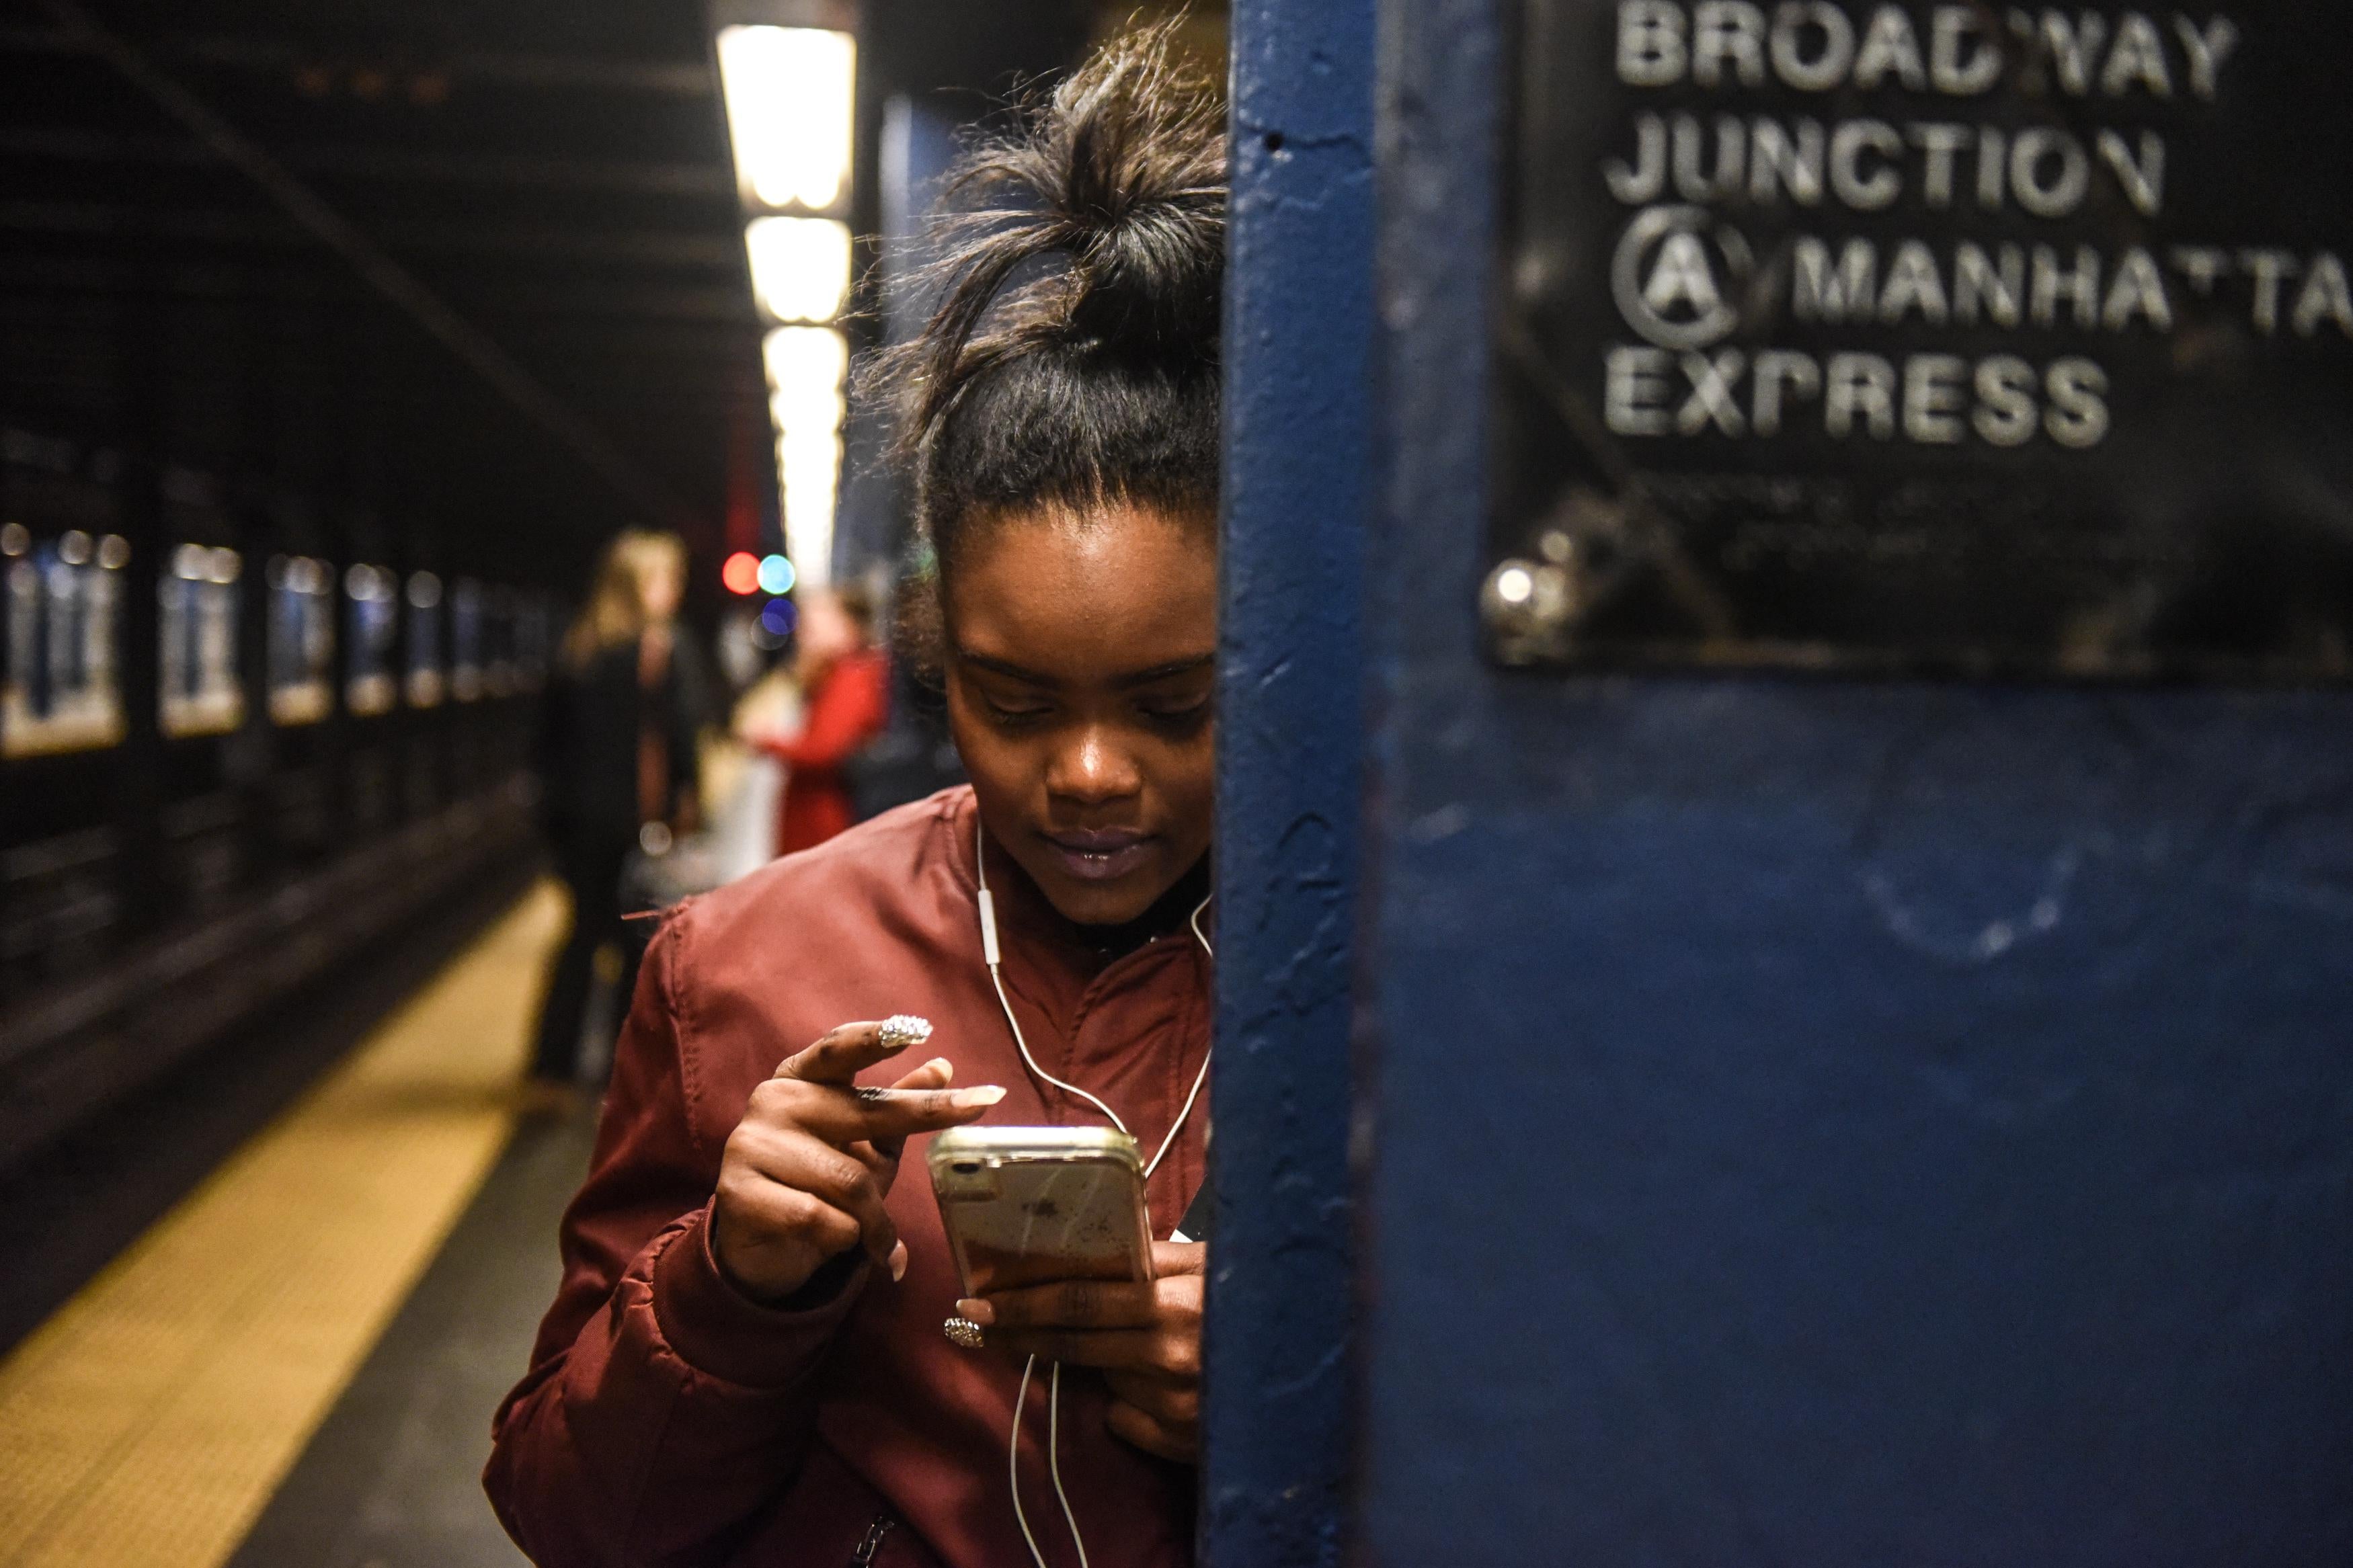 NEW YORK, NY - NOVEMBER 14: A woman looks at her phone while waiting on the platform at the Broadway Junction subway station on November 14, 2019 in New York City. The MTA, which oversees the New York City subway system, the largest in the United States, is reconsidering a plan to hire 500 new transit police officers as they face a $1 billion budget deficit. (Photo by Stephanie Keith/Getty Images)